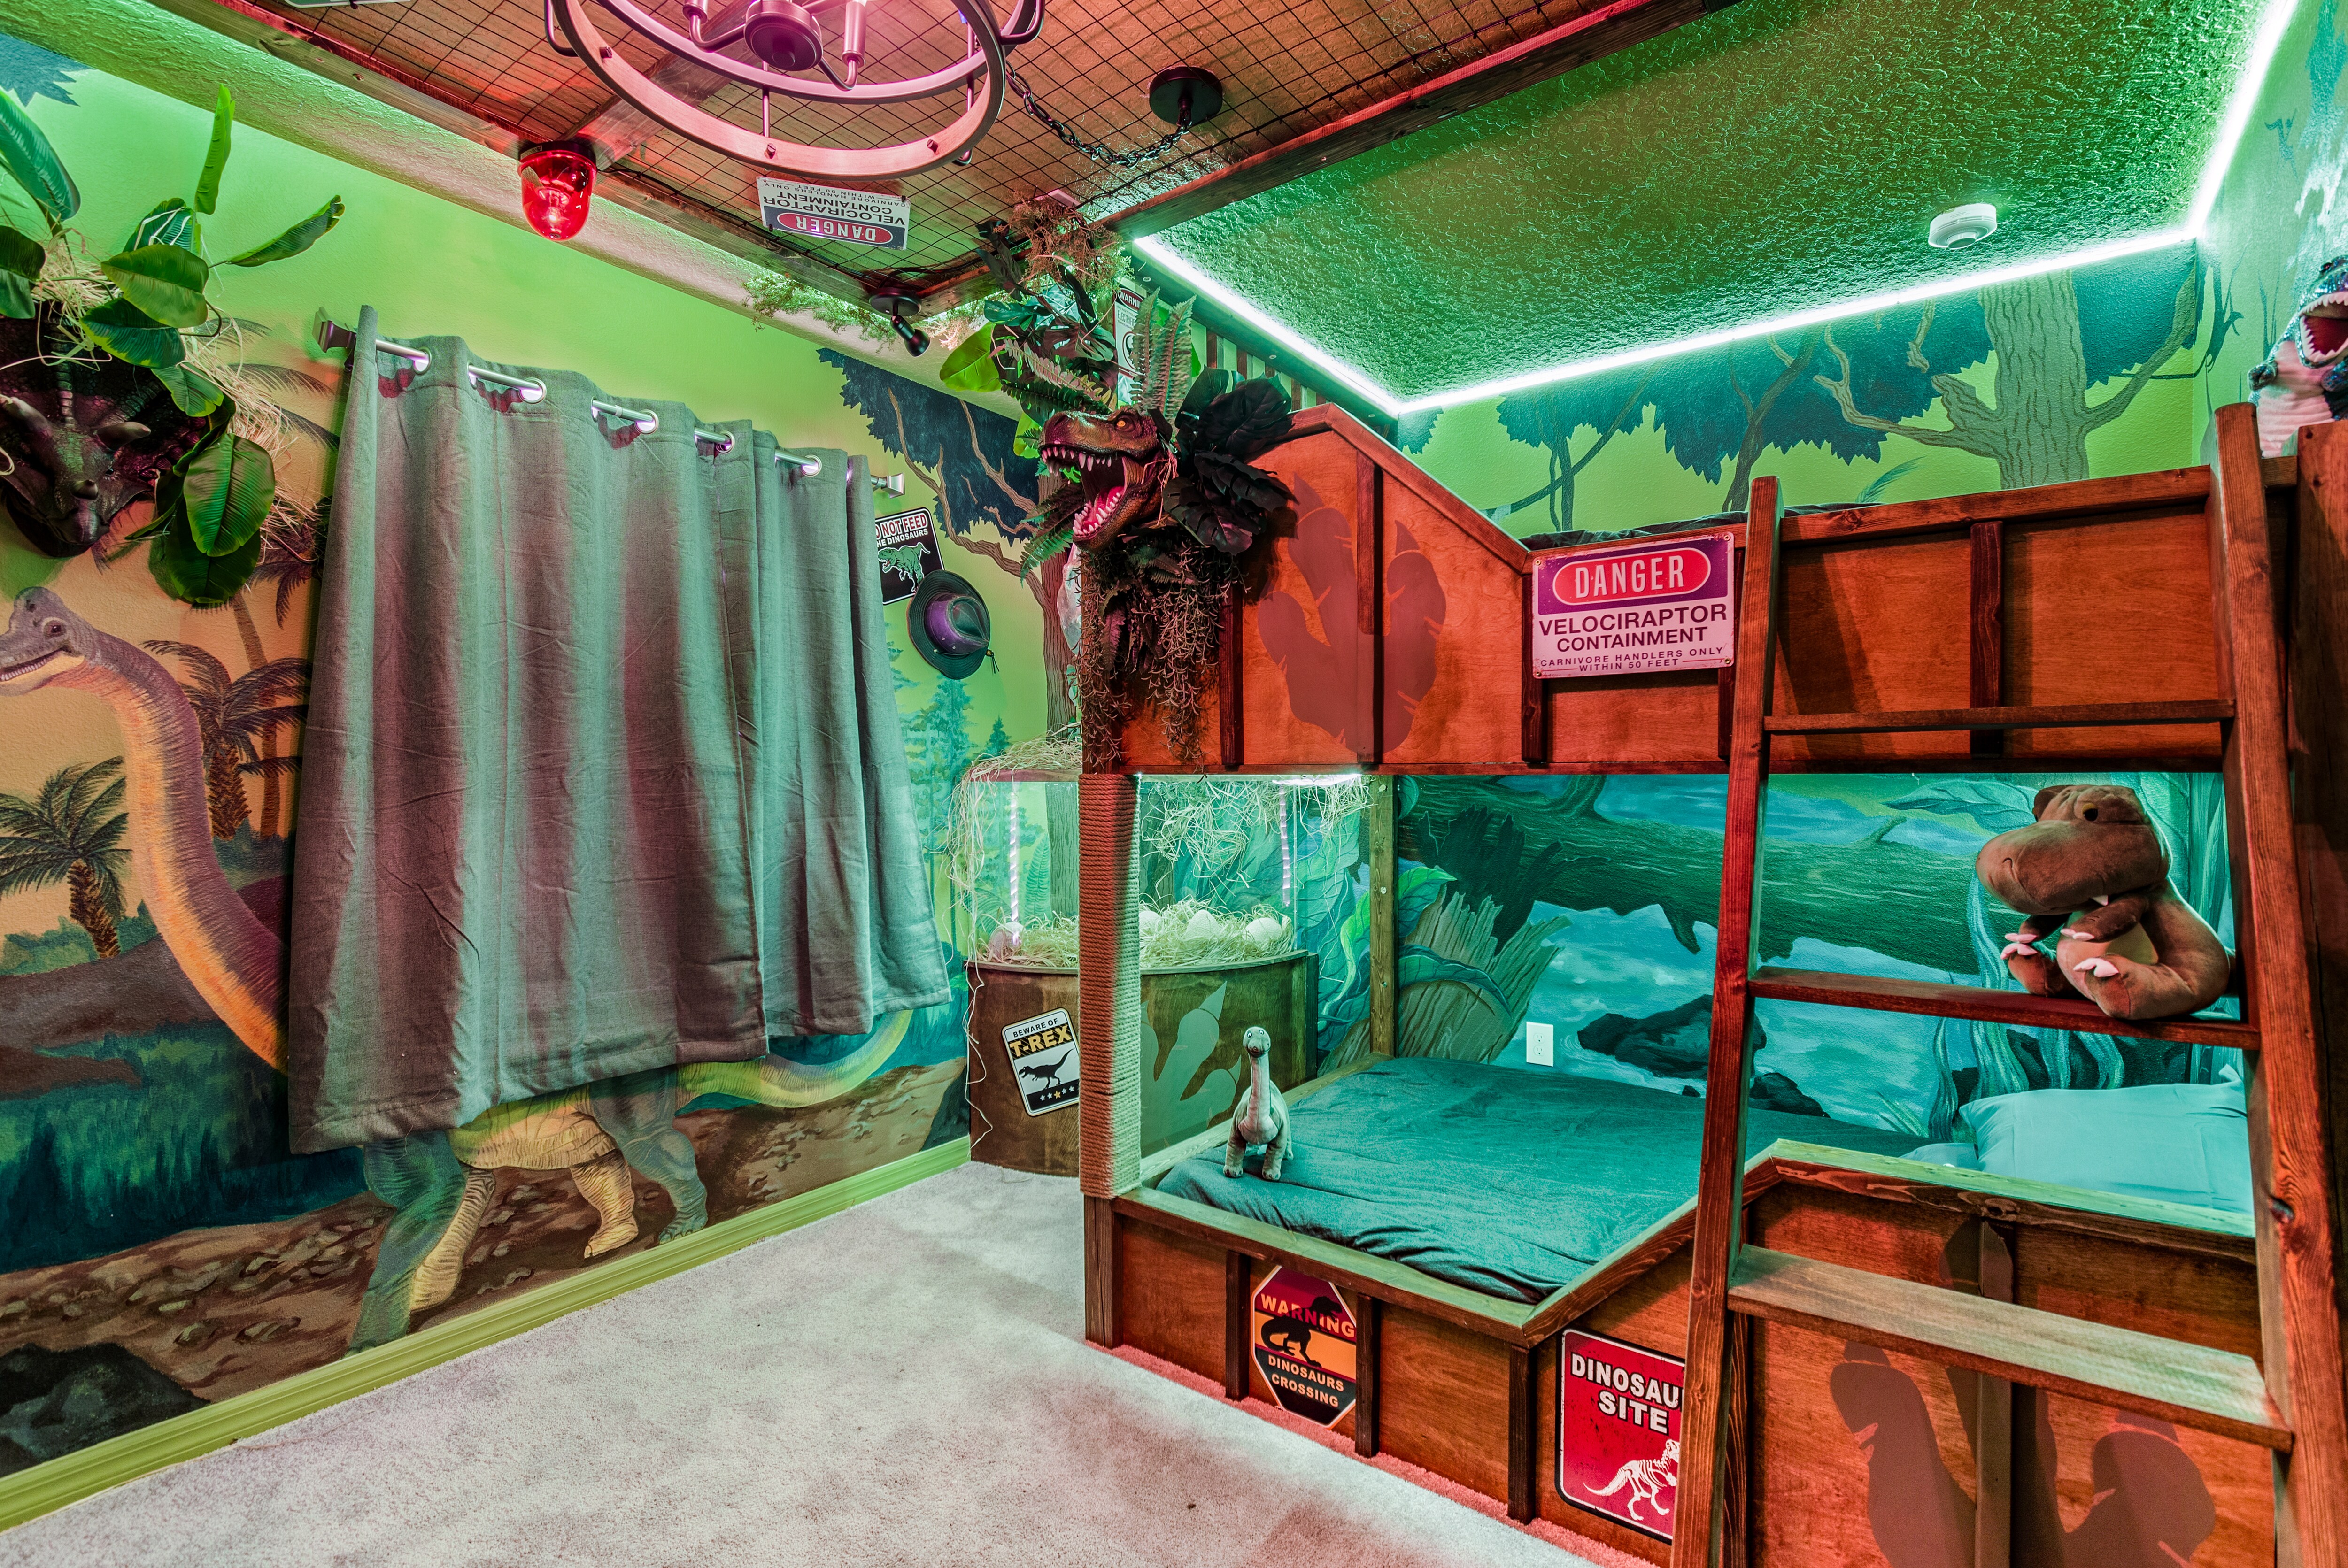 Experience the wild side in our Jungle Adventure Bedroom. With cozy bunk bed, this room offers a unique and exciting stay for children who love adventure.